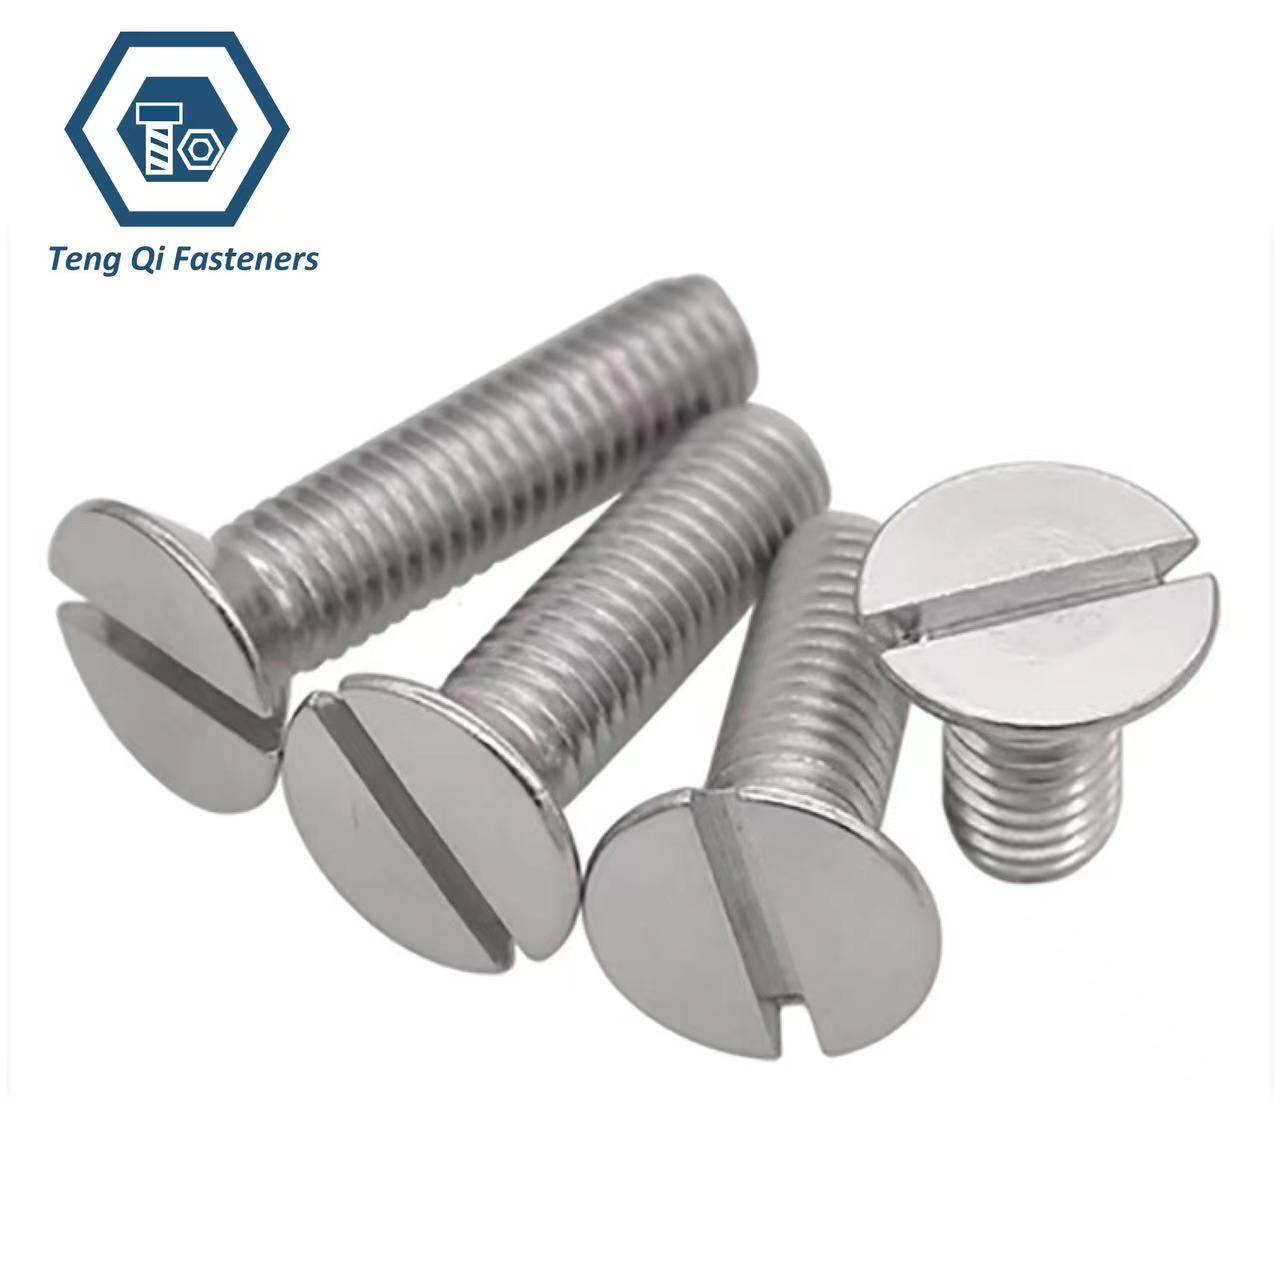 Stainless Steel American Standard ASME B18.5 80°Slotted countersunk Head Bolts